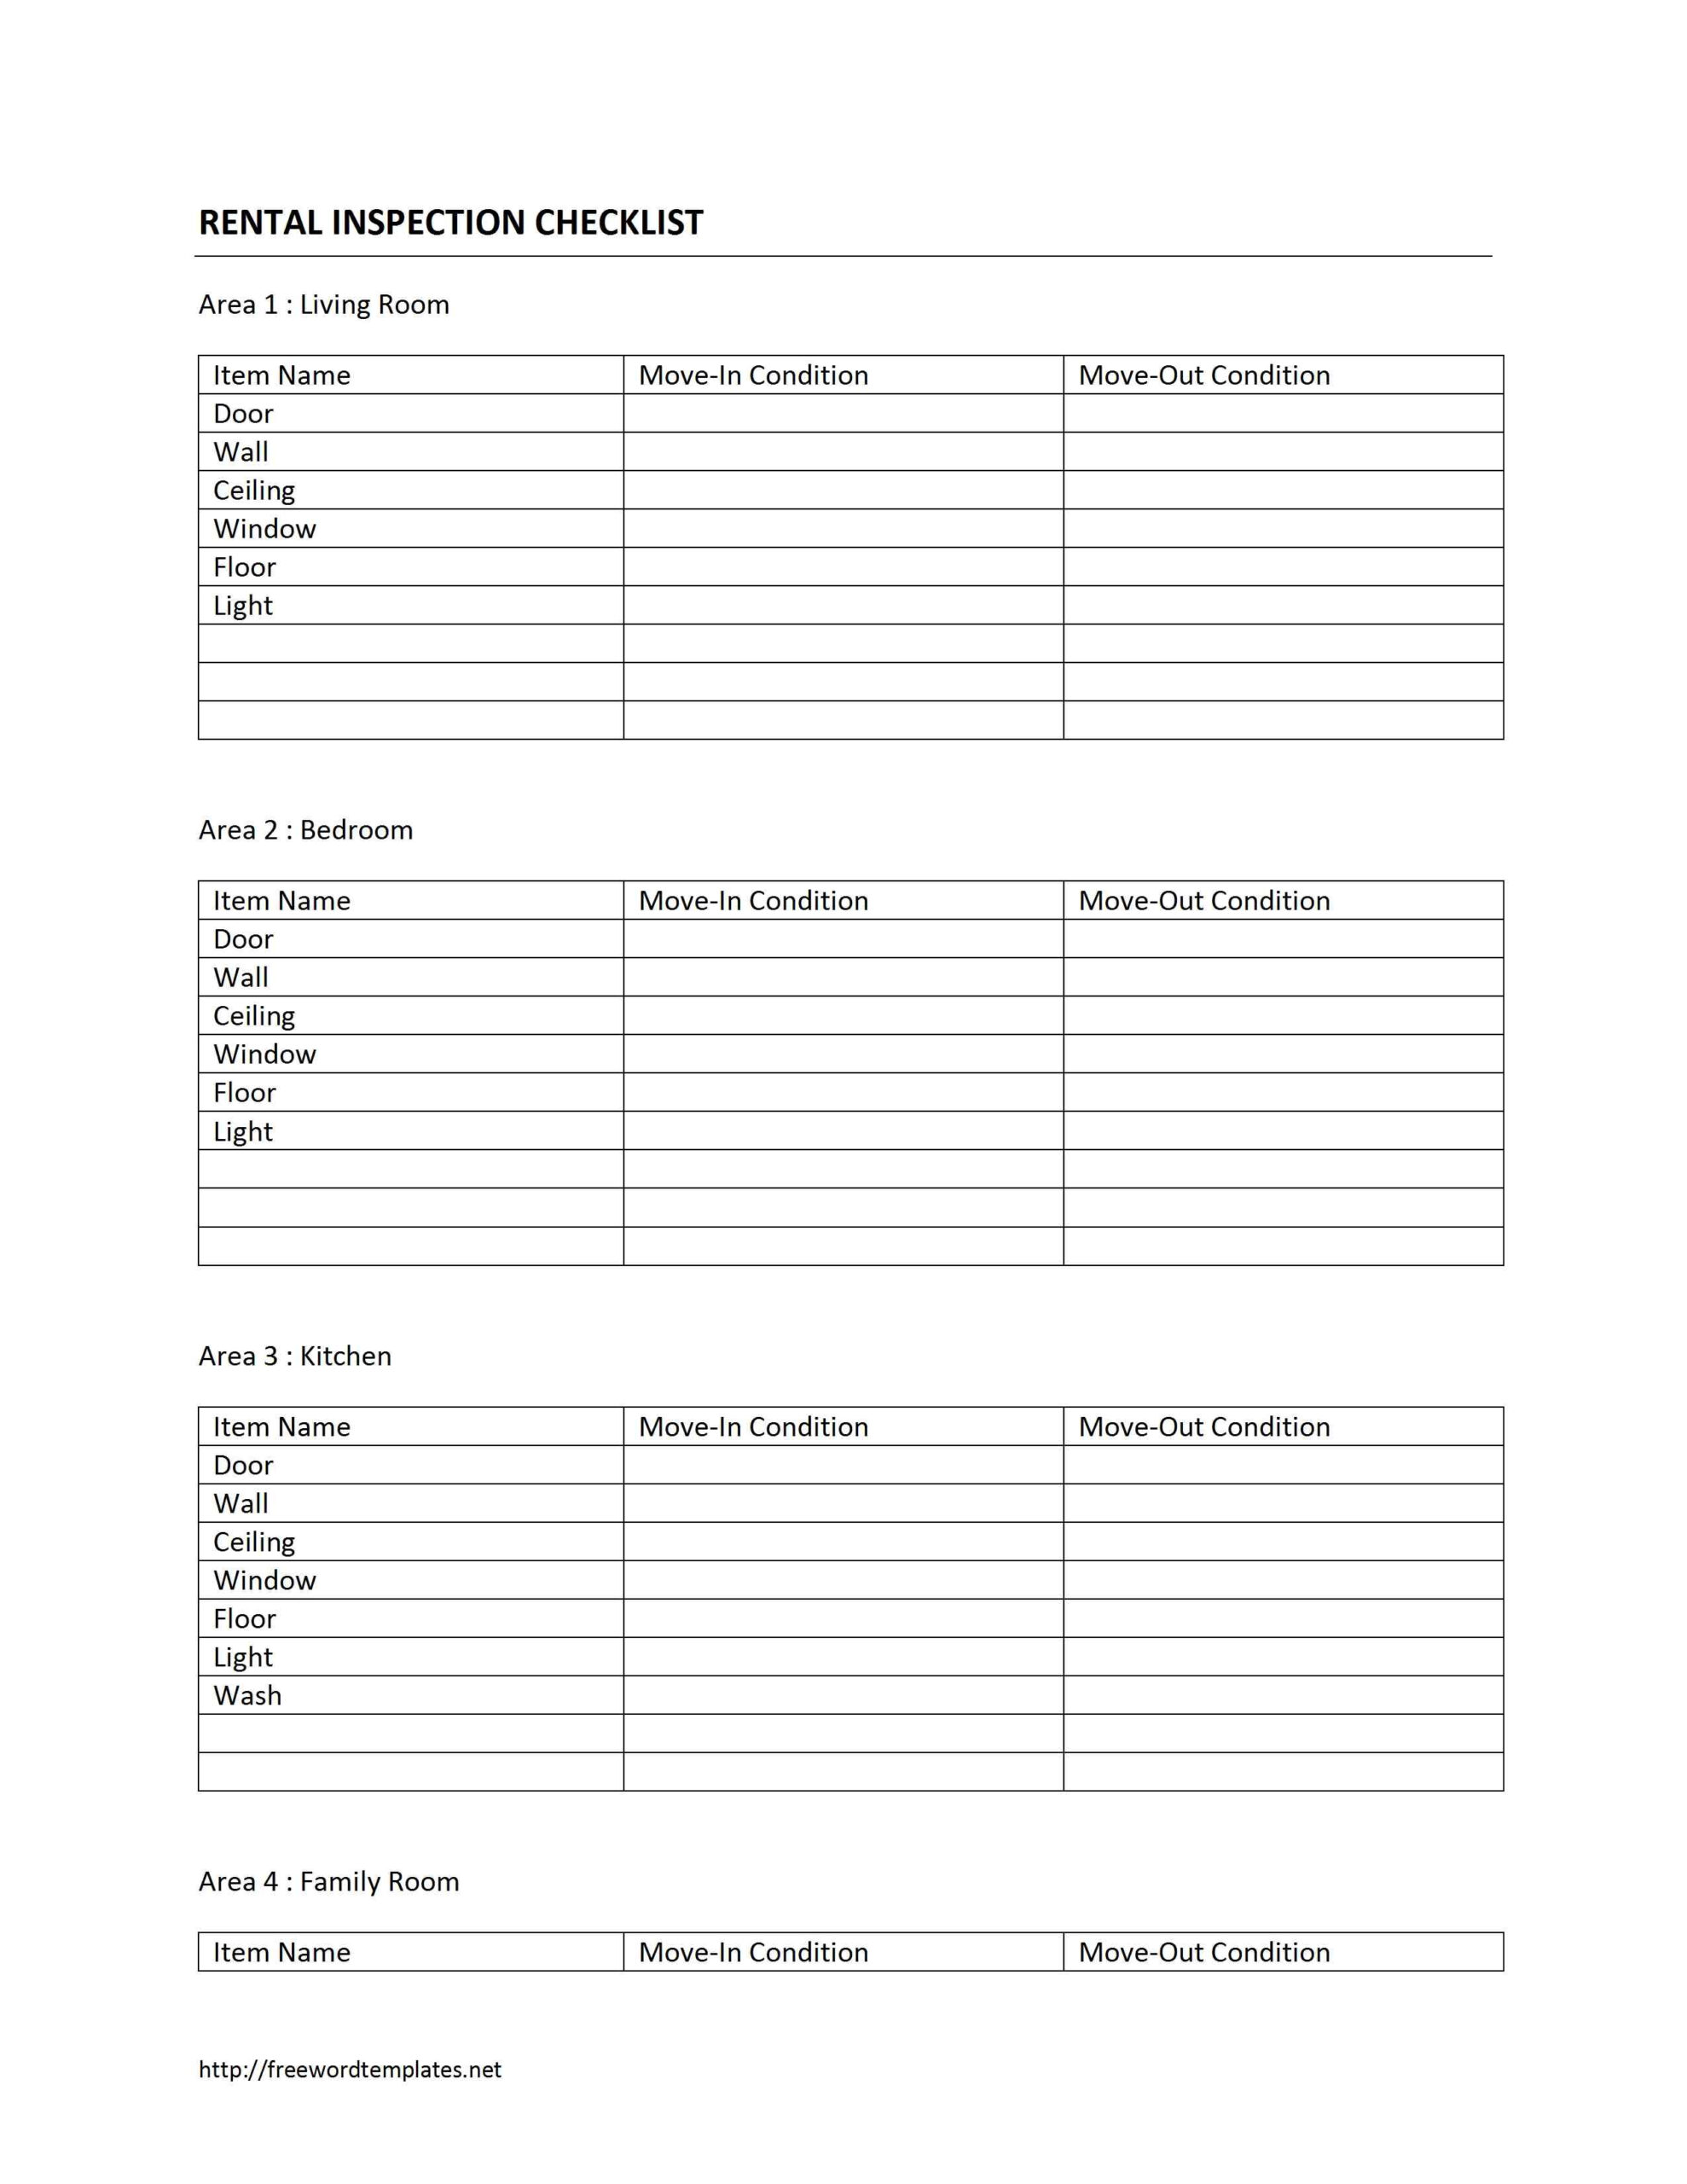 Home Rental Inspection Checklist Template With Vacation Rental Checklist Template Pertaining To Vacation Rental Checklist Template